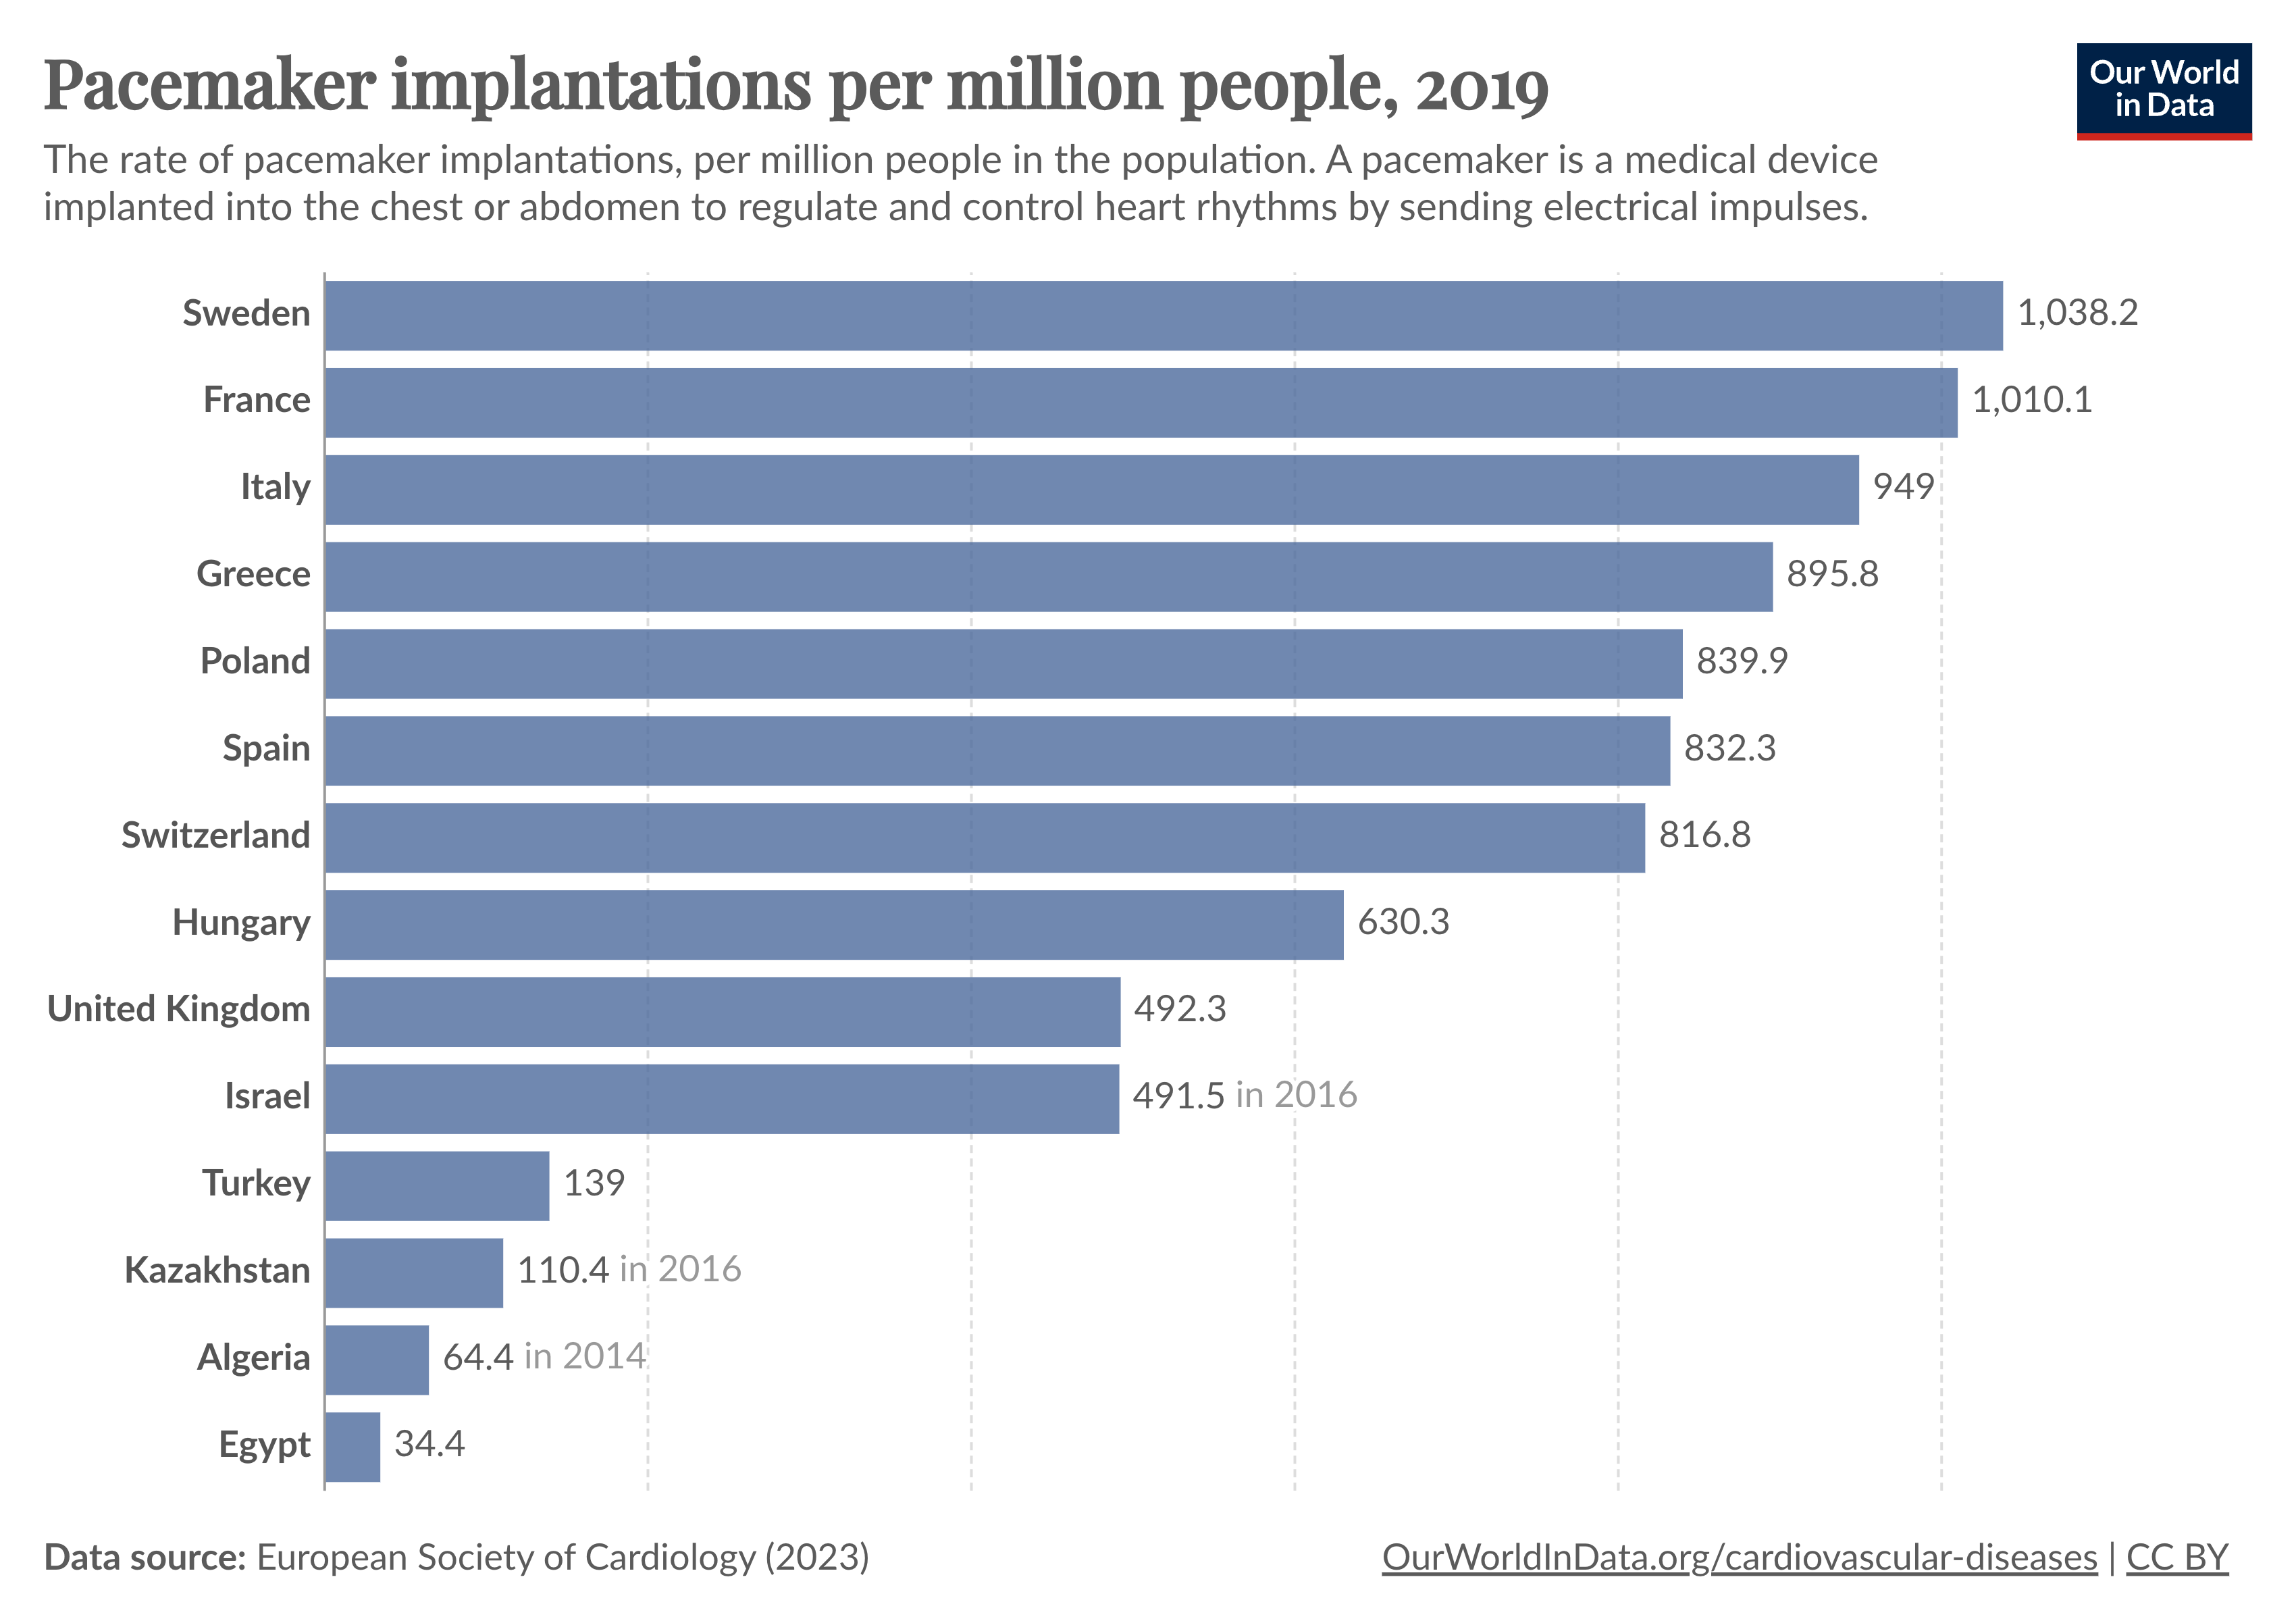 Bar chart showing the number of pacemaker implantations per million people in different countries.